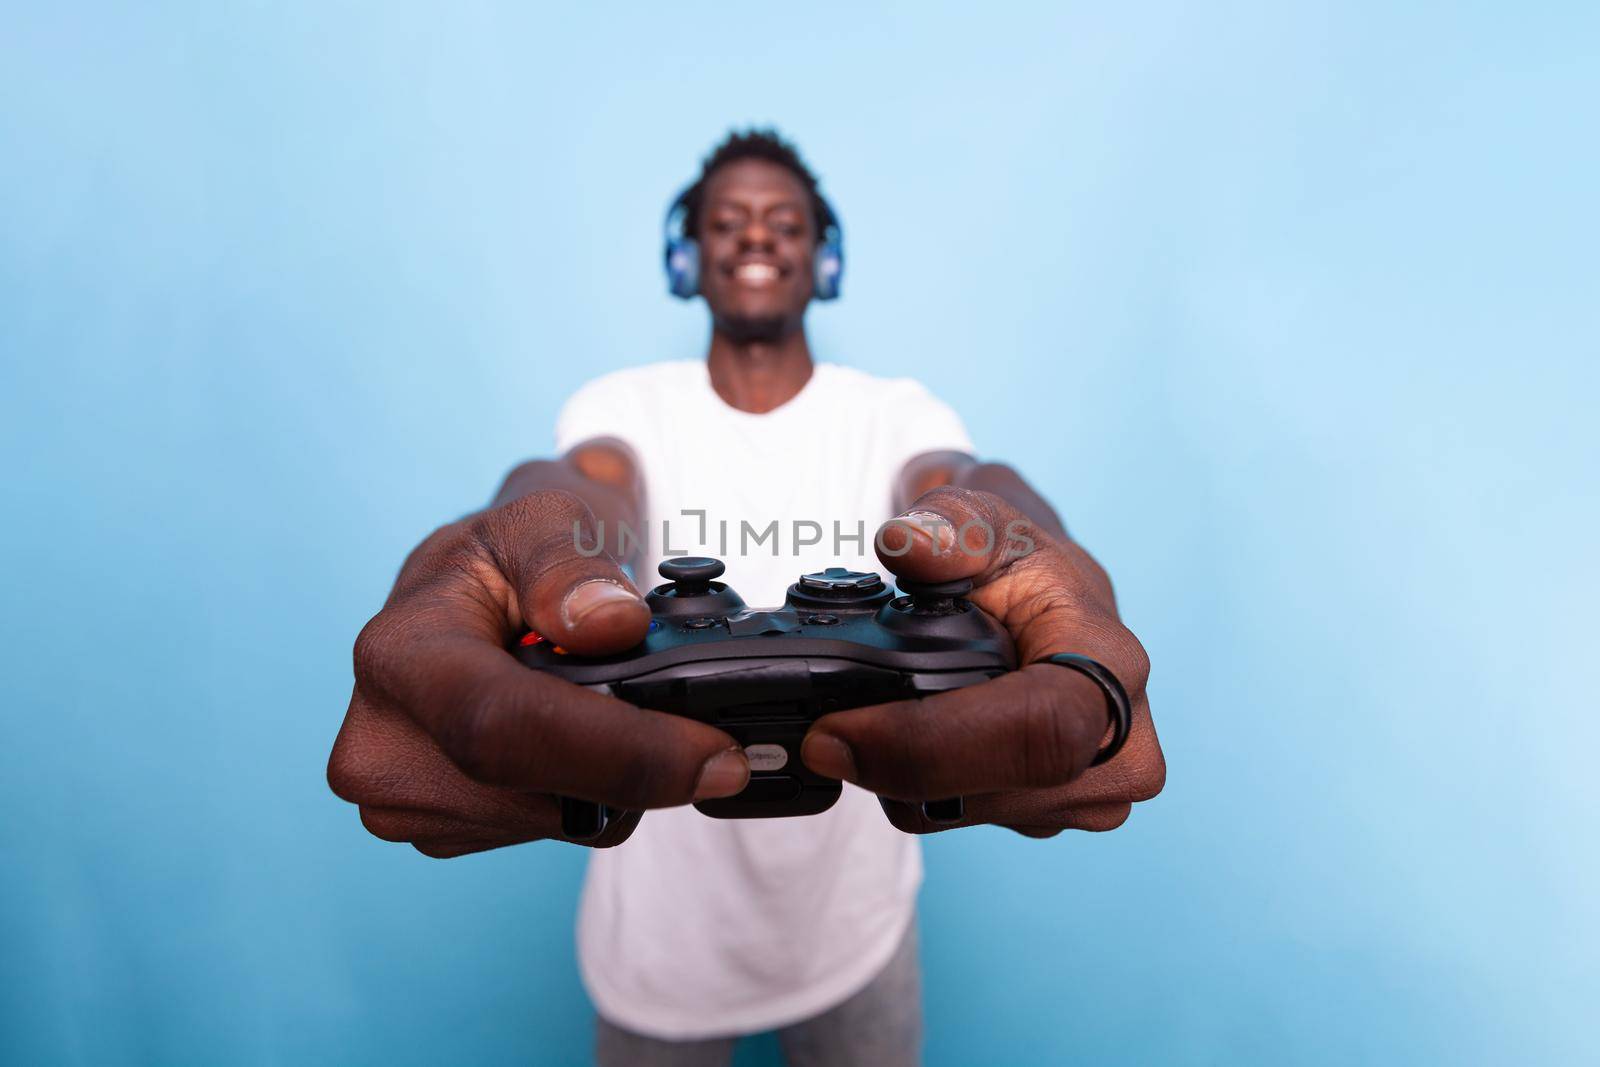 Person showing controller to play video games while wearing headset. Young adult playing game with joystick and listening to music on headphones. Modern man having fun with technology.